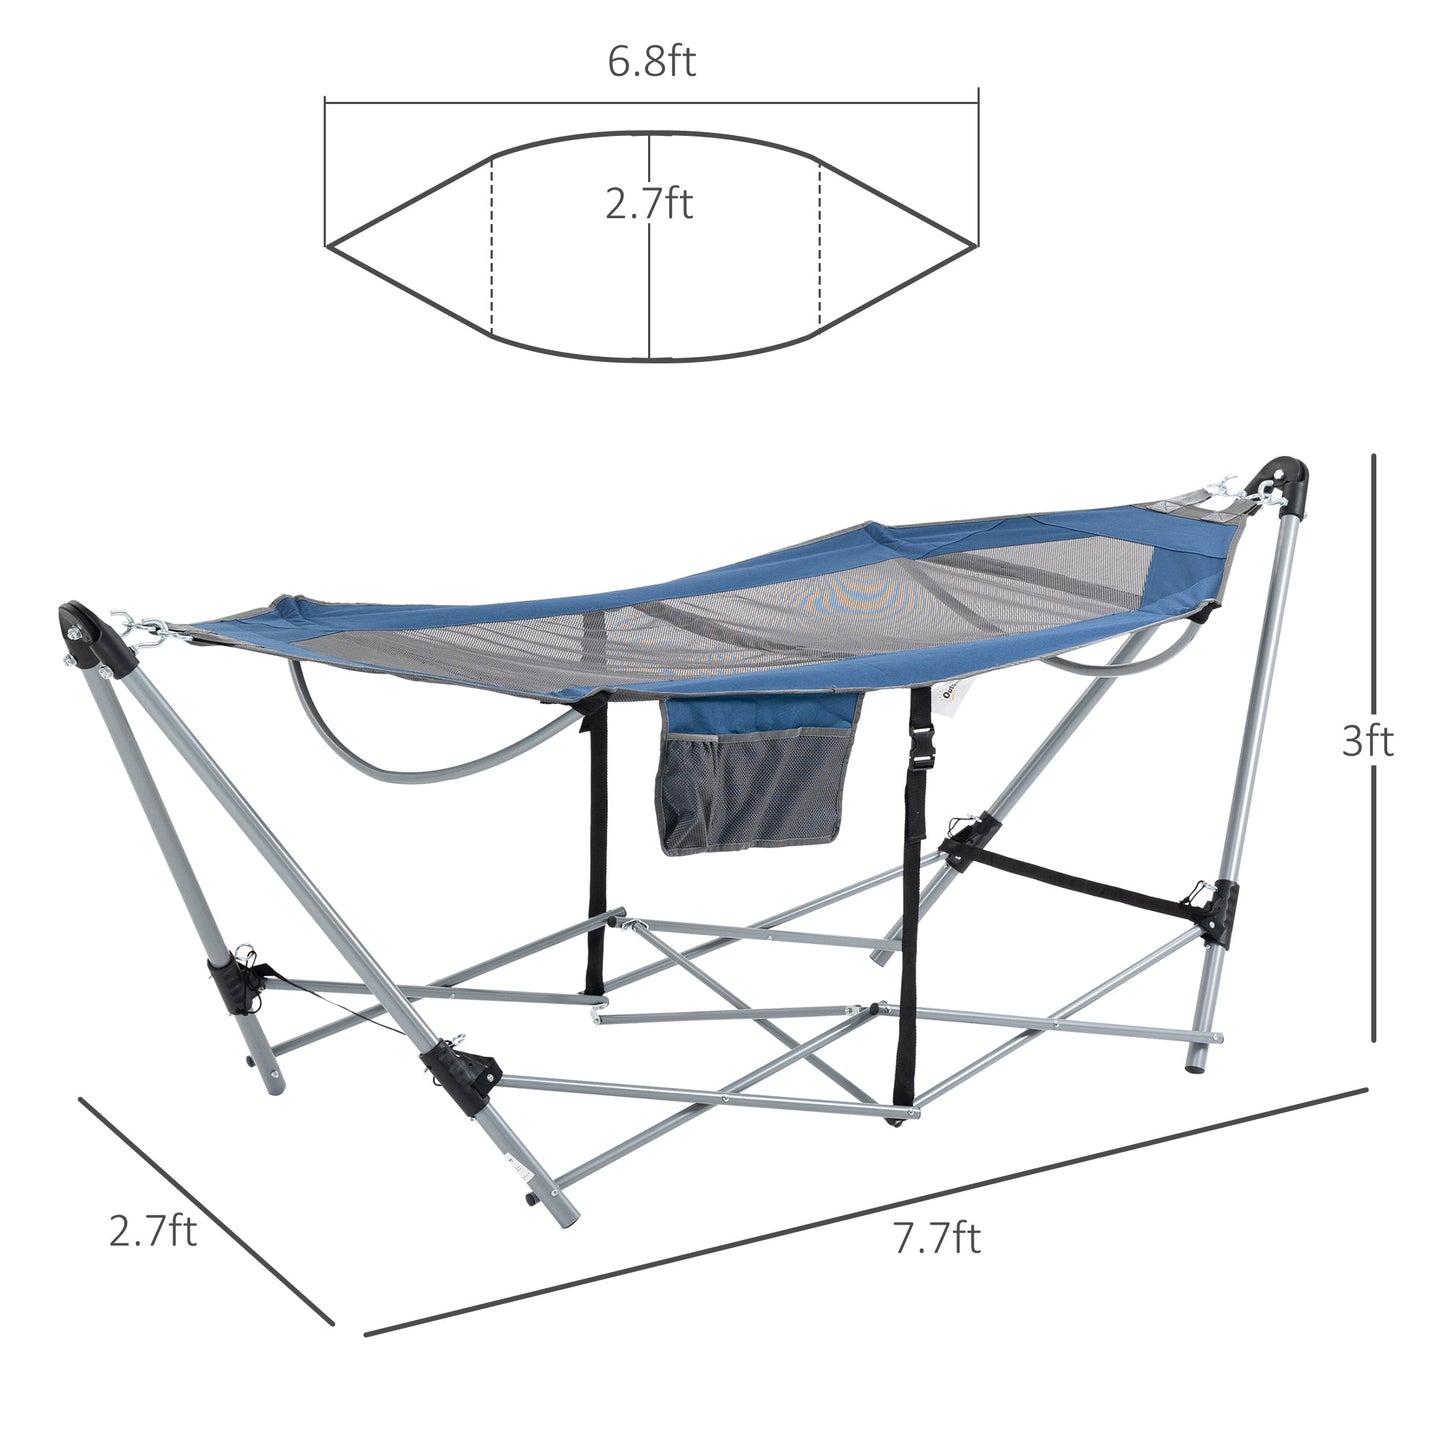 Foldable Outdoor Hammock with Stand, Portable Hammock Bed with Carrying Bag and Pocket for Travel, Beach, Backyard, Patio, Hiking, Dark Blue - Gallery Canada